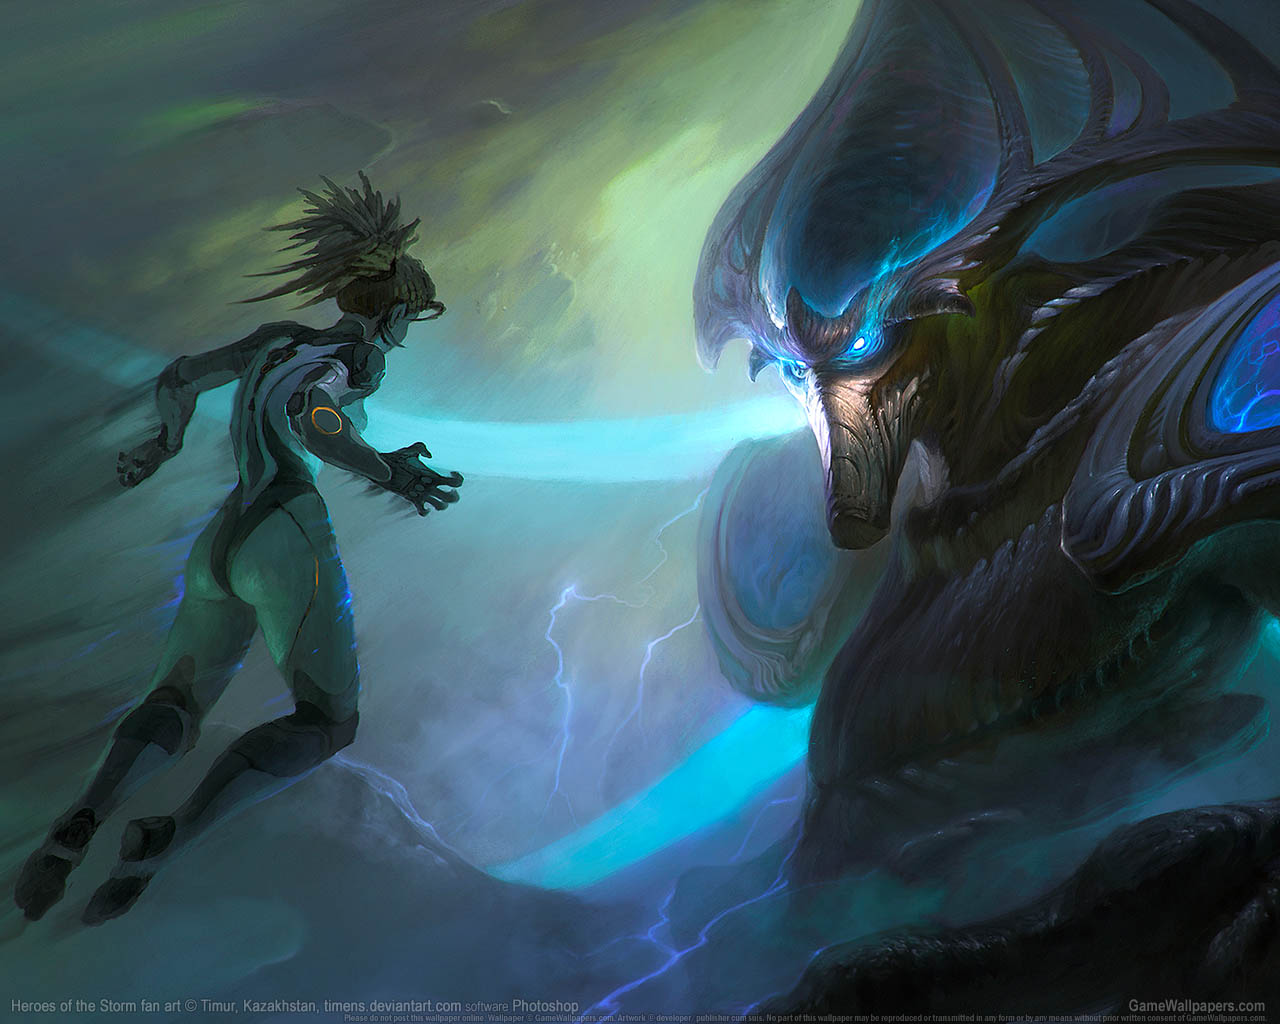 Heroes of the Storm fan art achtergrond 09 1280x1024